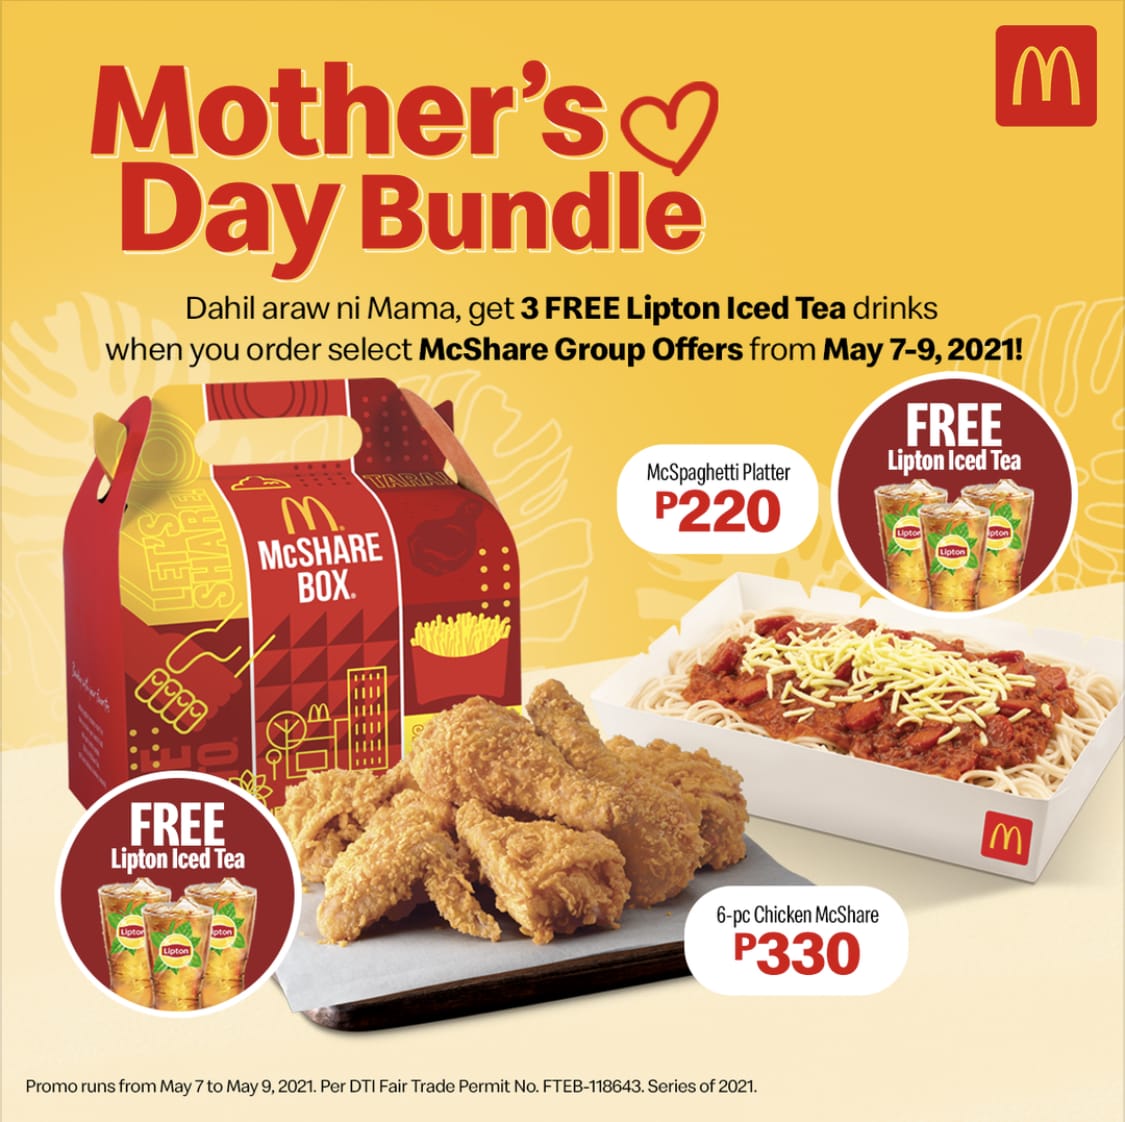 Download Mcdonald S Mother S Day Bundle Get Free Lipton Iced Tea With Select Mcshare Group Offers Deals Pinoy